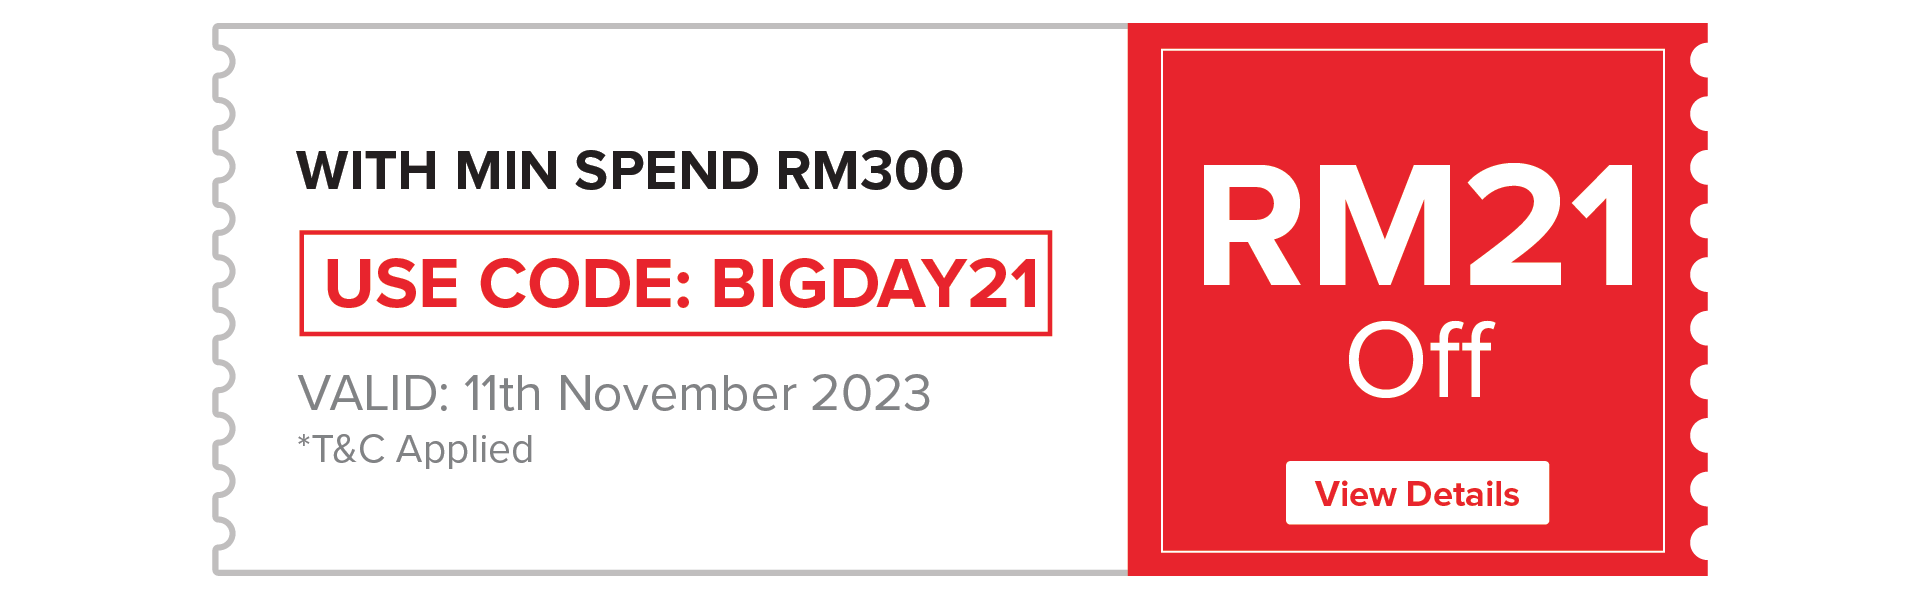 RM15 Off with min spend RM240